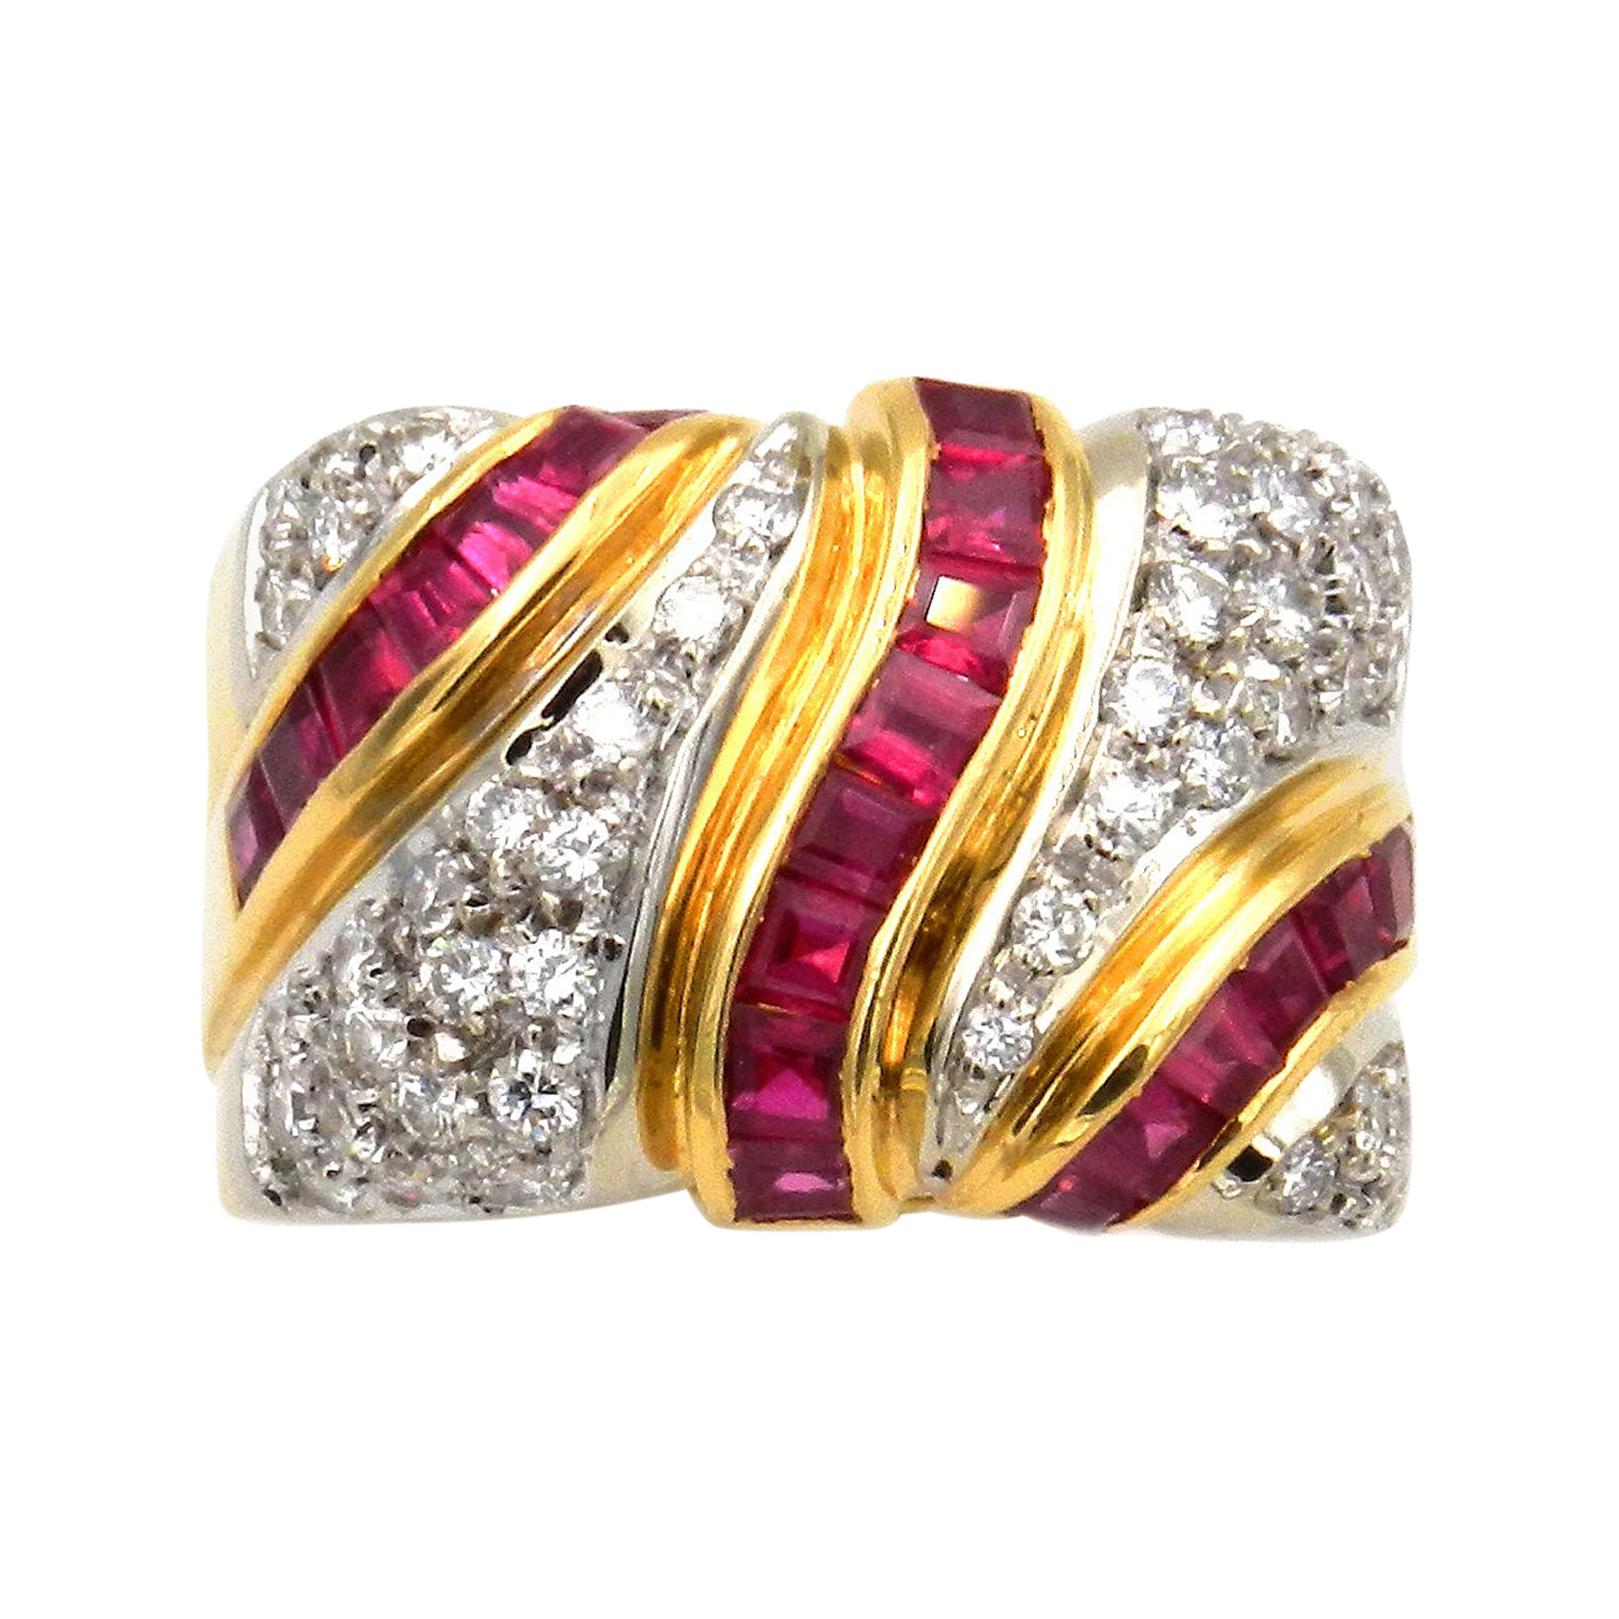 1.55 Carat Ruby and Diamond Band Ring in 18k Gold